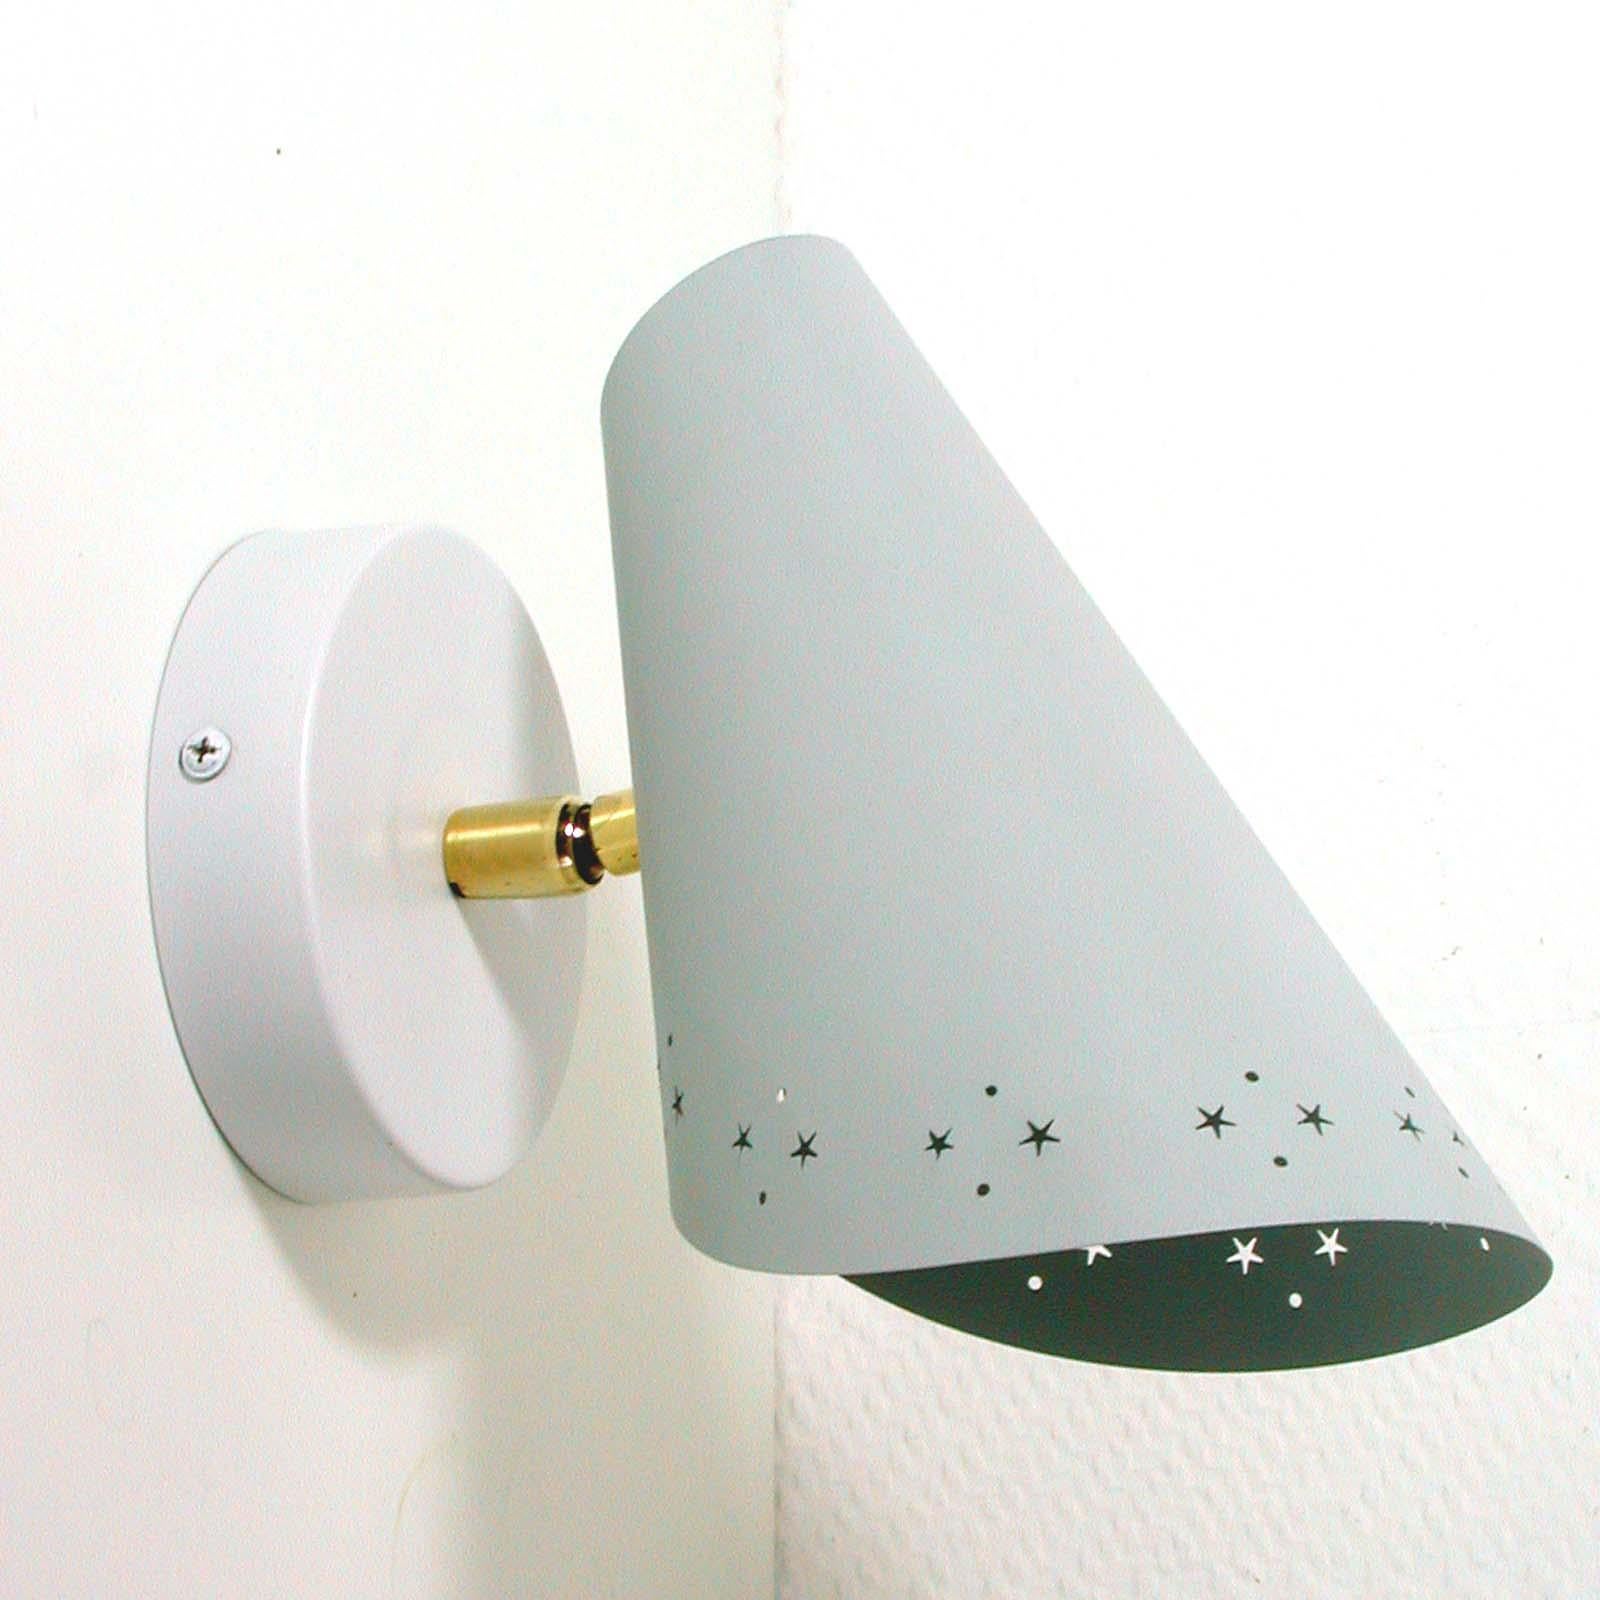 Rare and awesome Italian petite sconce. Made of brass and light grey lacquered metal with white backplate (4